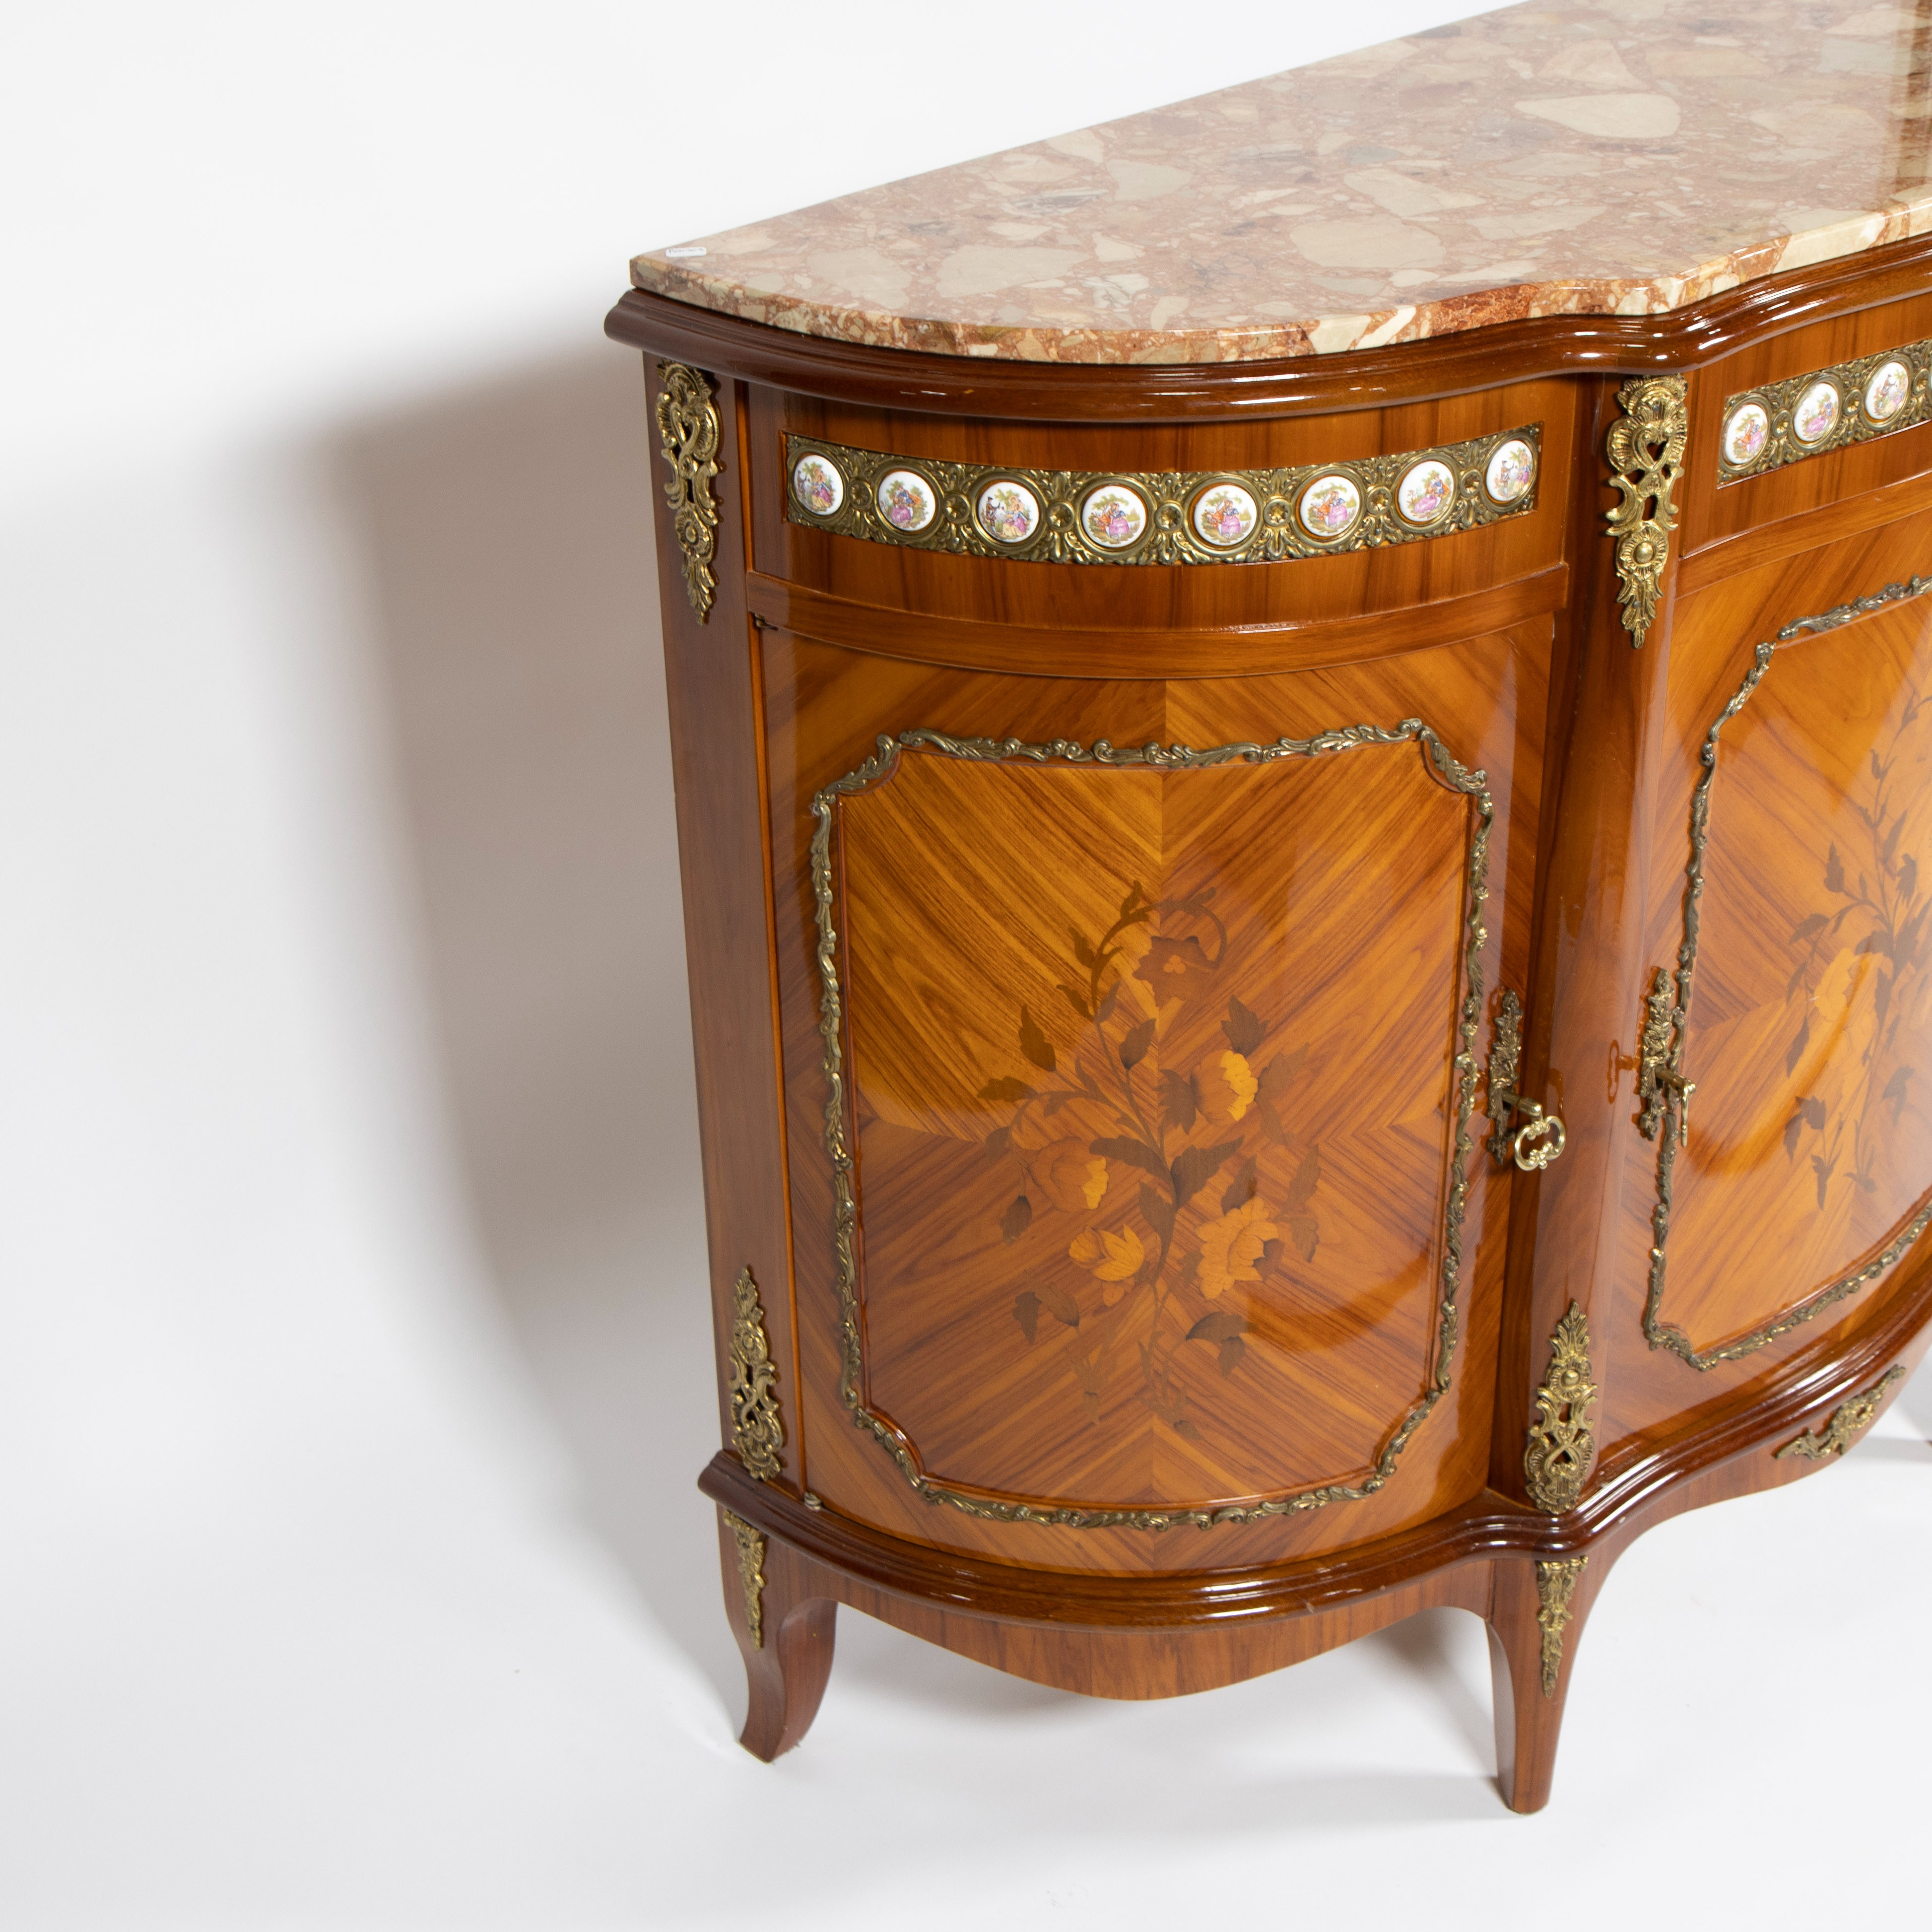 Cabinet style Louis XV with imitation marquetry, bronze fittings and marble top - Image 4 of 4